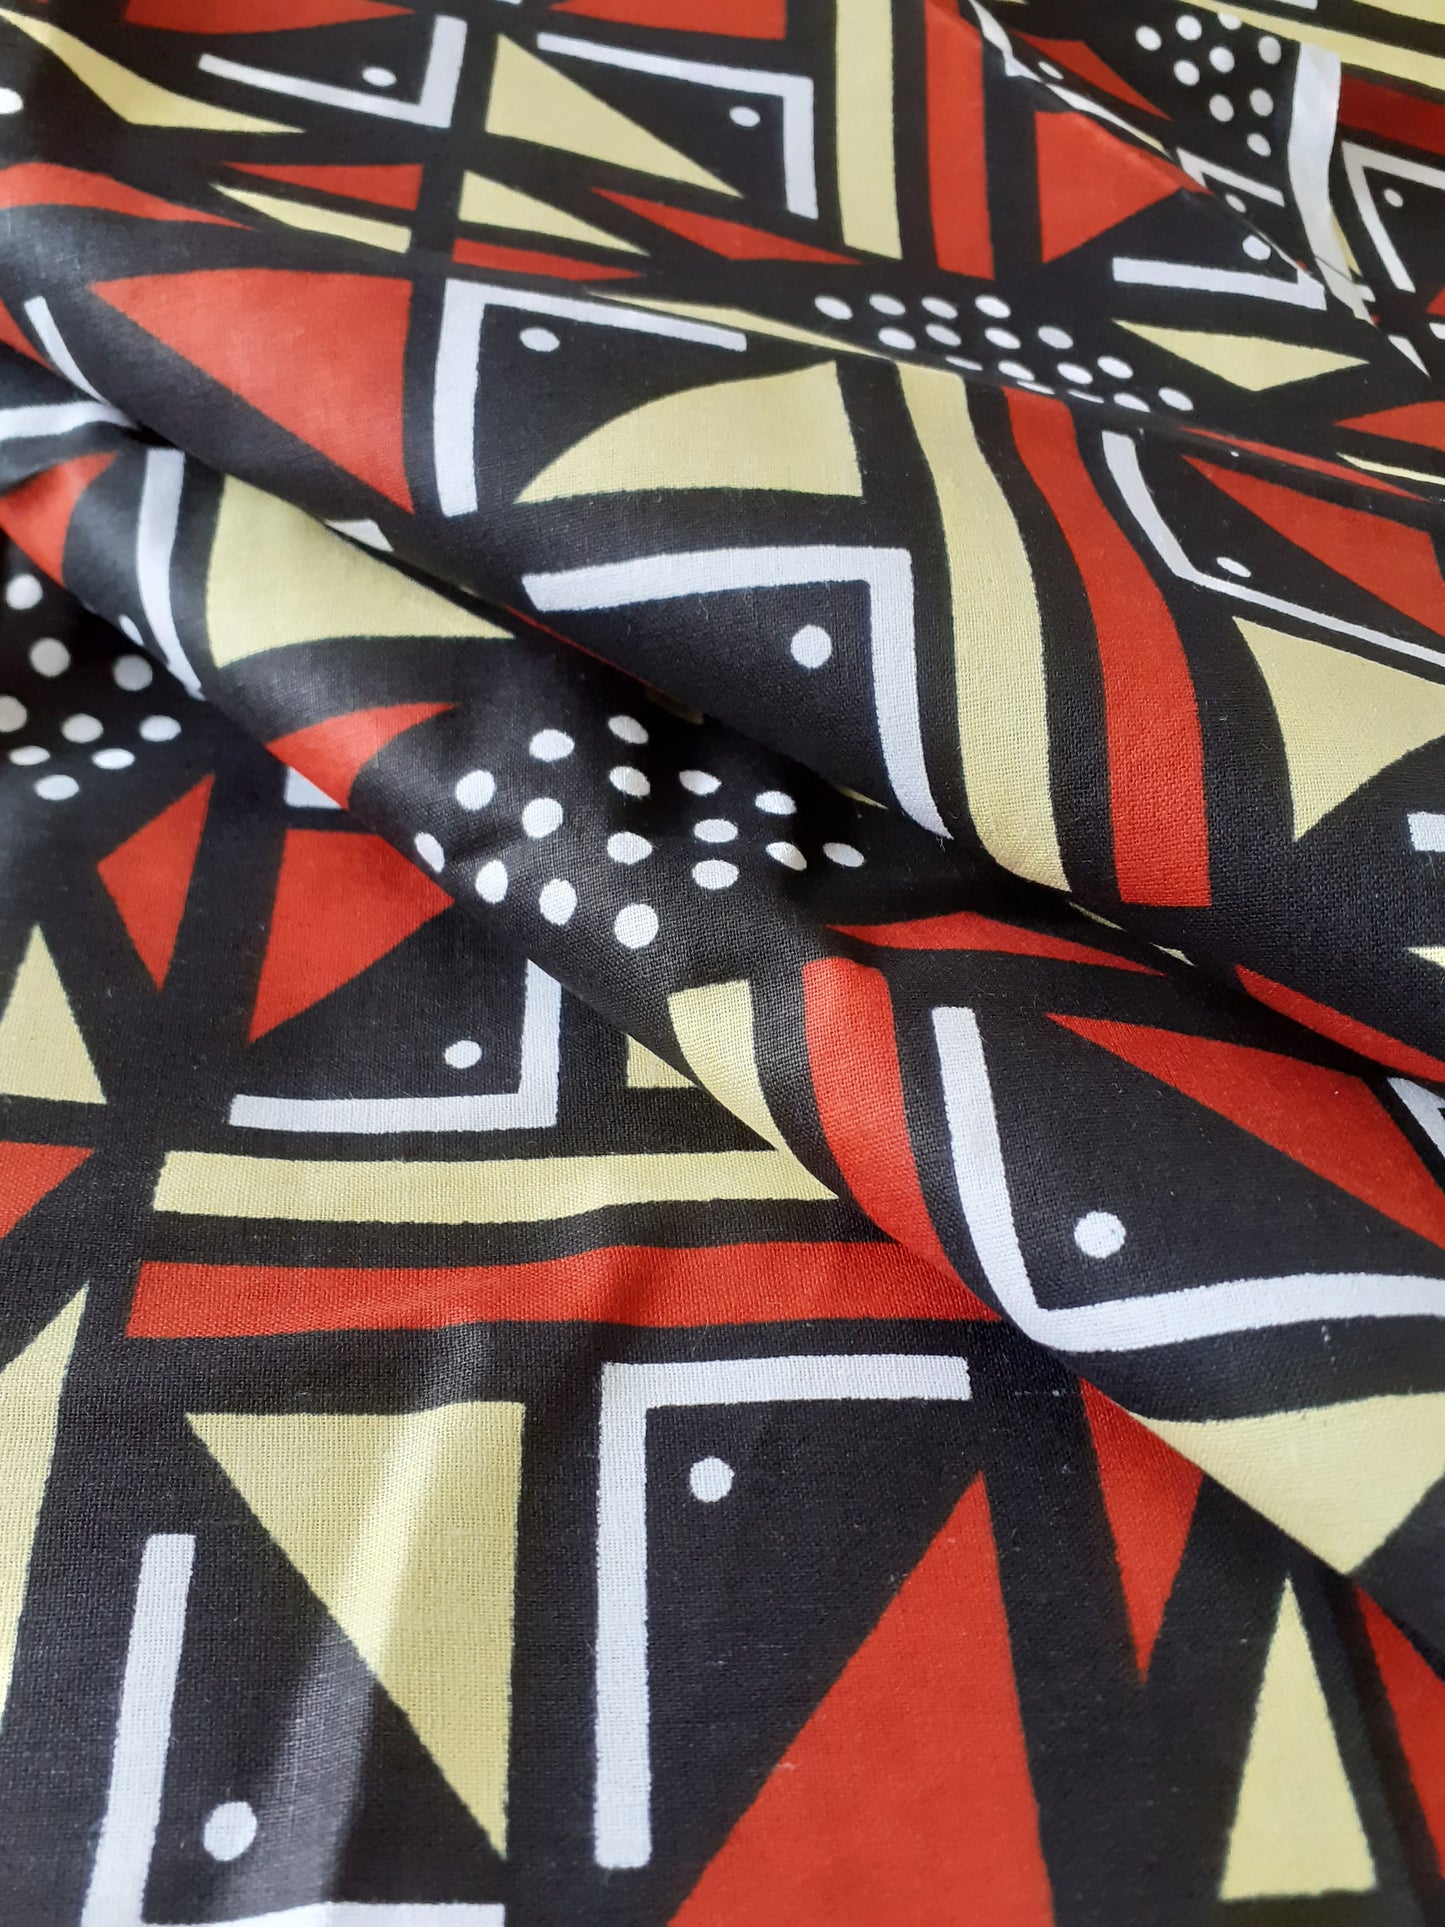 African Fabrics By the Yard - Mudcloth - Burnt Orange, Pale Yellow, Black, and White